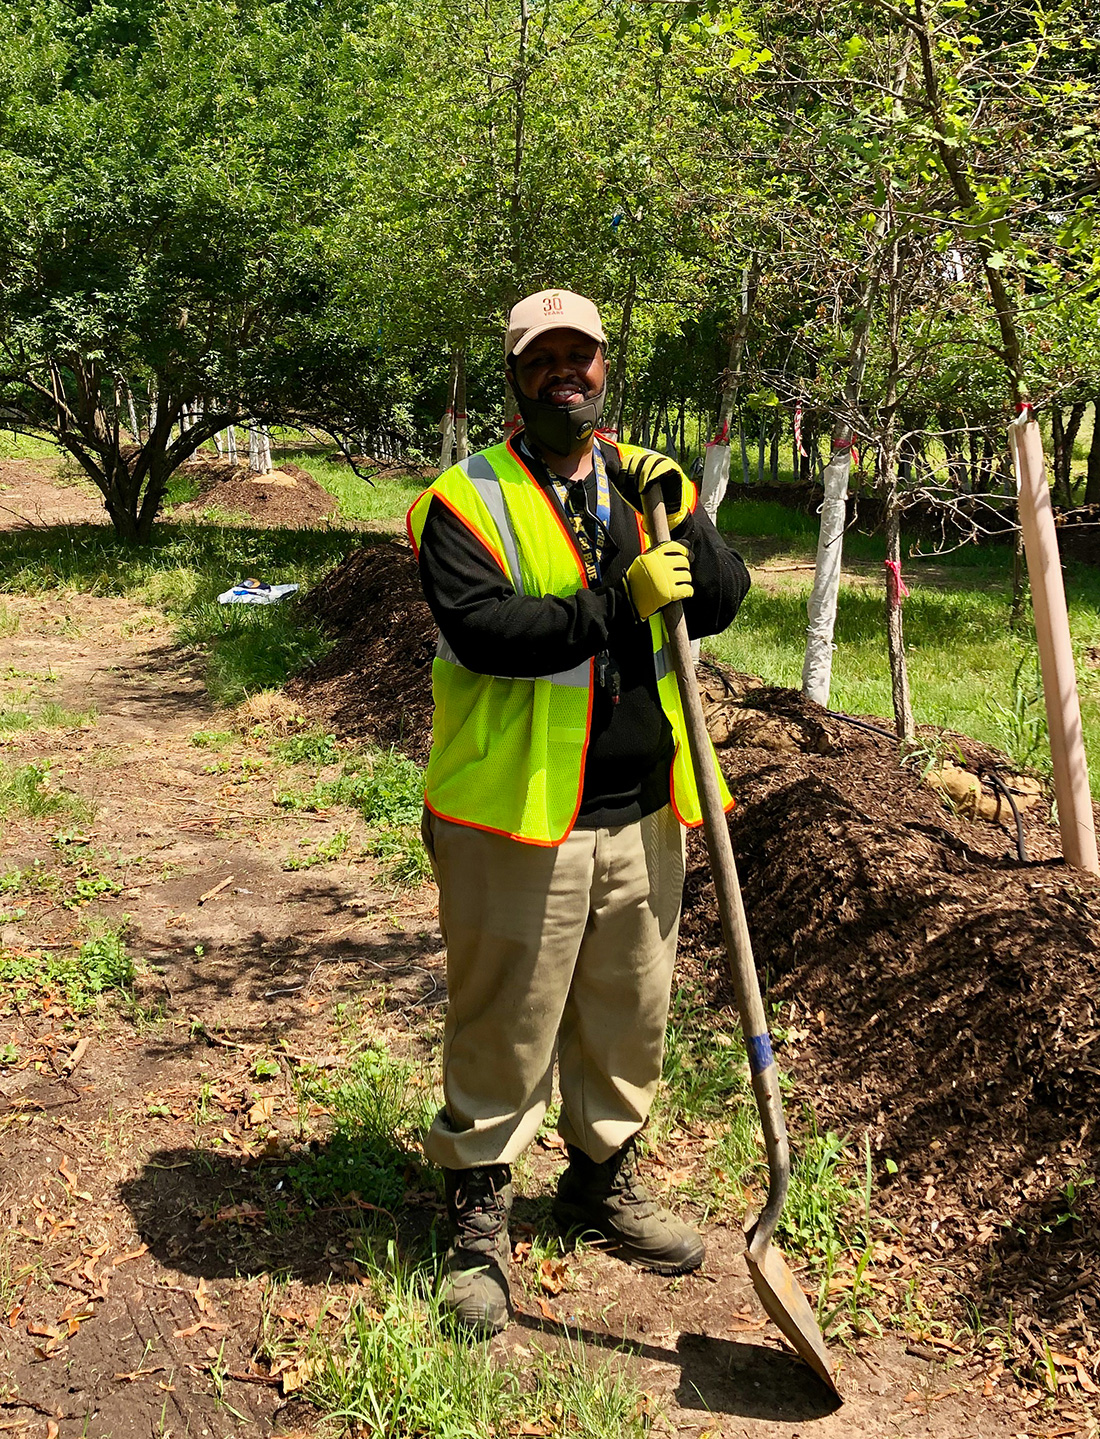 After being incarcerated, William Rucker joined an urban forestry training program with The Greening of Detroit. He now works for “The Greening” but has also started his own landscaping business.